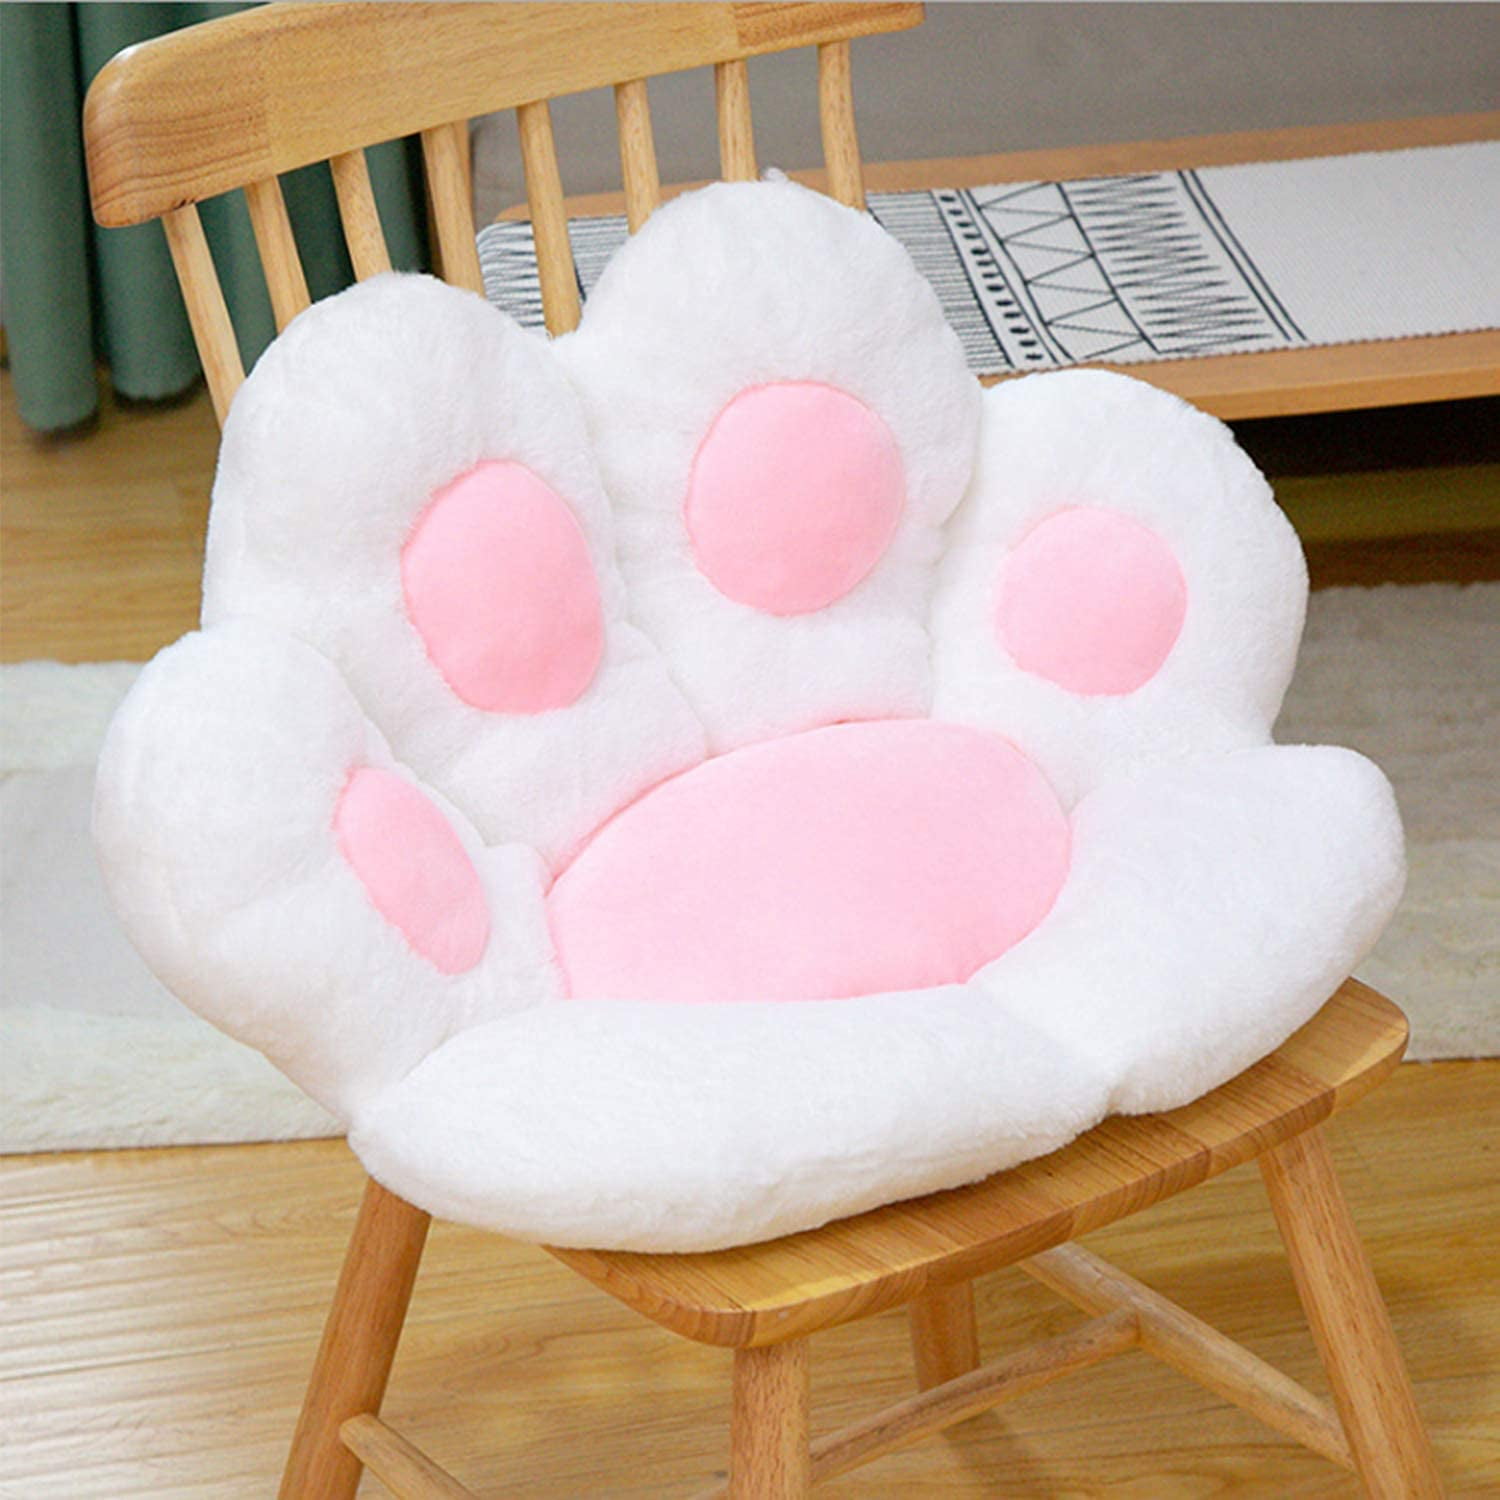 Skin-Friendly Floor Mat Specially Designed for Home S-27.5x23.6in, A Cat Paw Cushion Cute Seat Cushion,Cat Paw Shape Lazy Sofa Bear Paw Chair Cushion Warm Floor Cushion for Dining Room Office Chair 